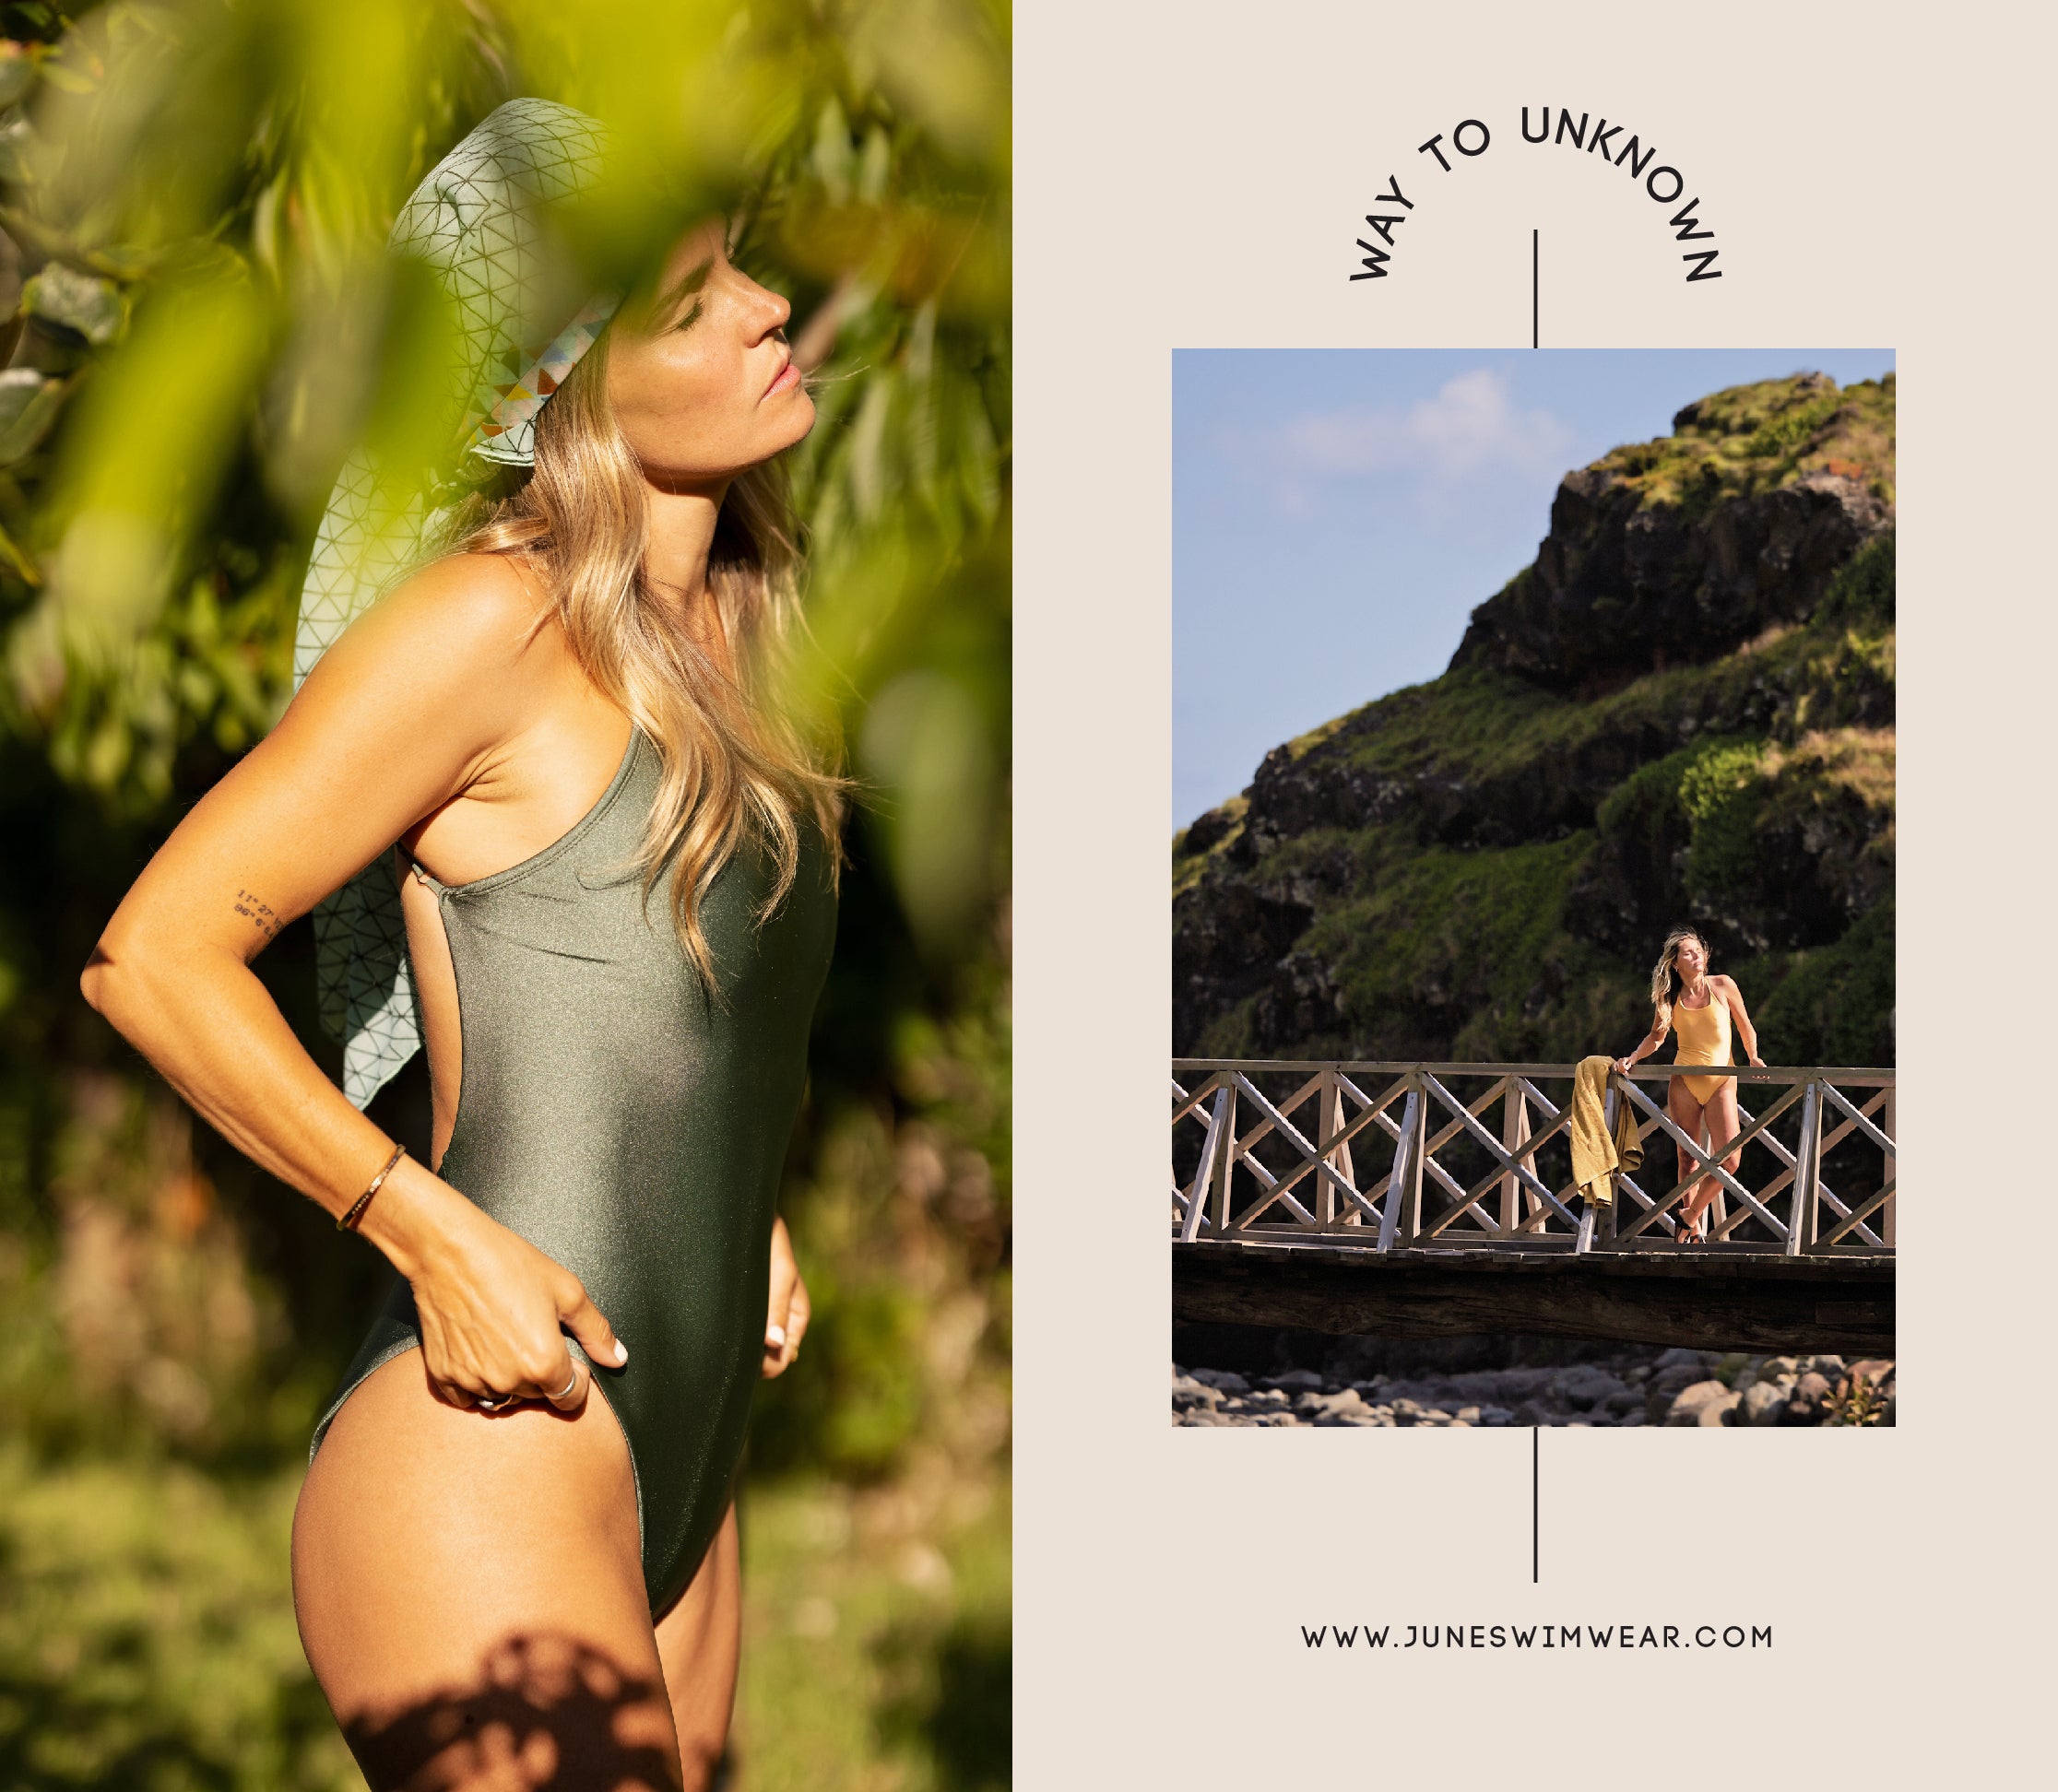 Model on the left is wearing Bianca one piece in Aloes. Model on the right is wearing Bianca one-piece in Ginger